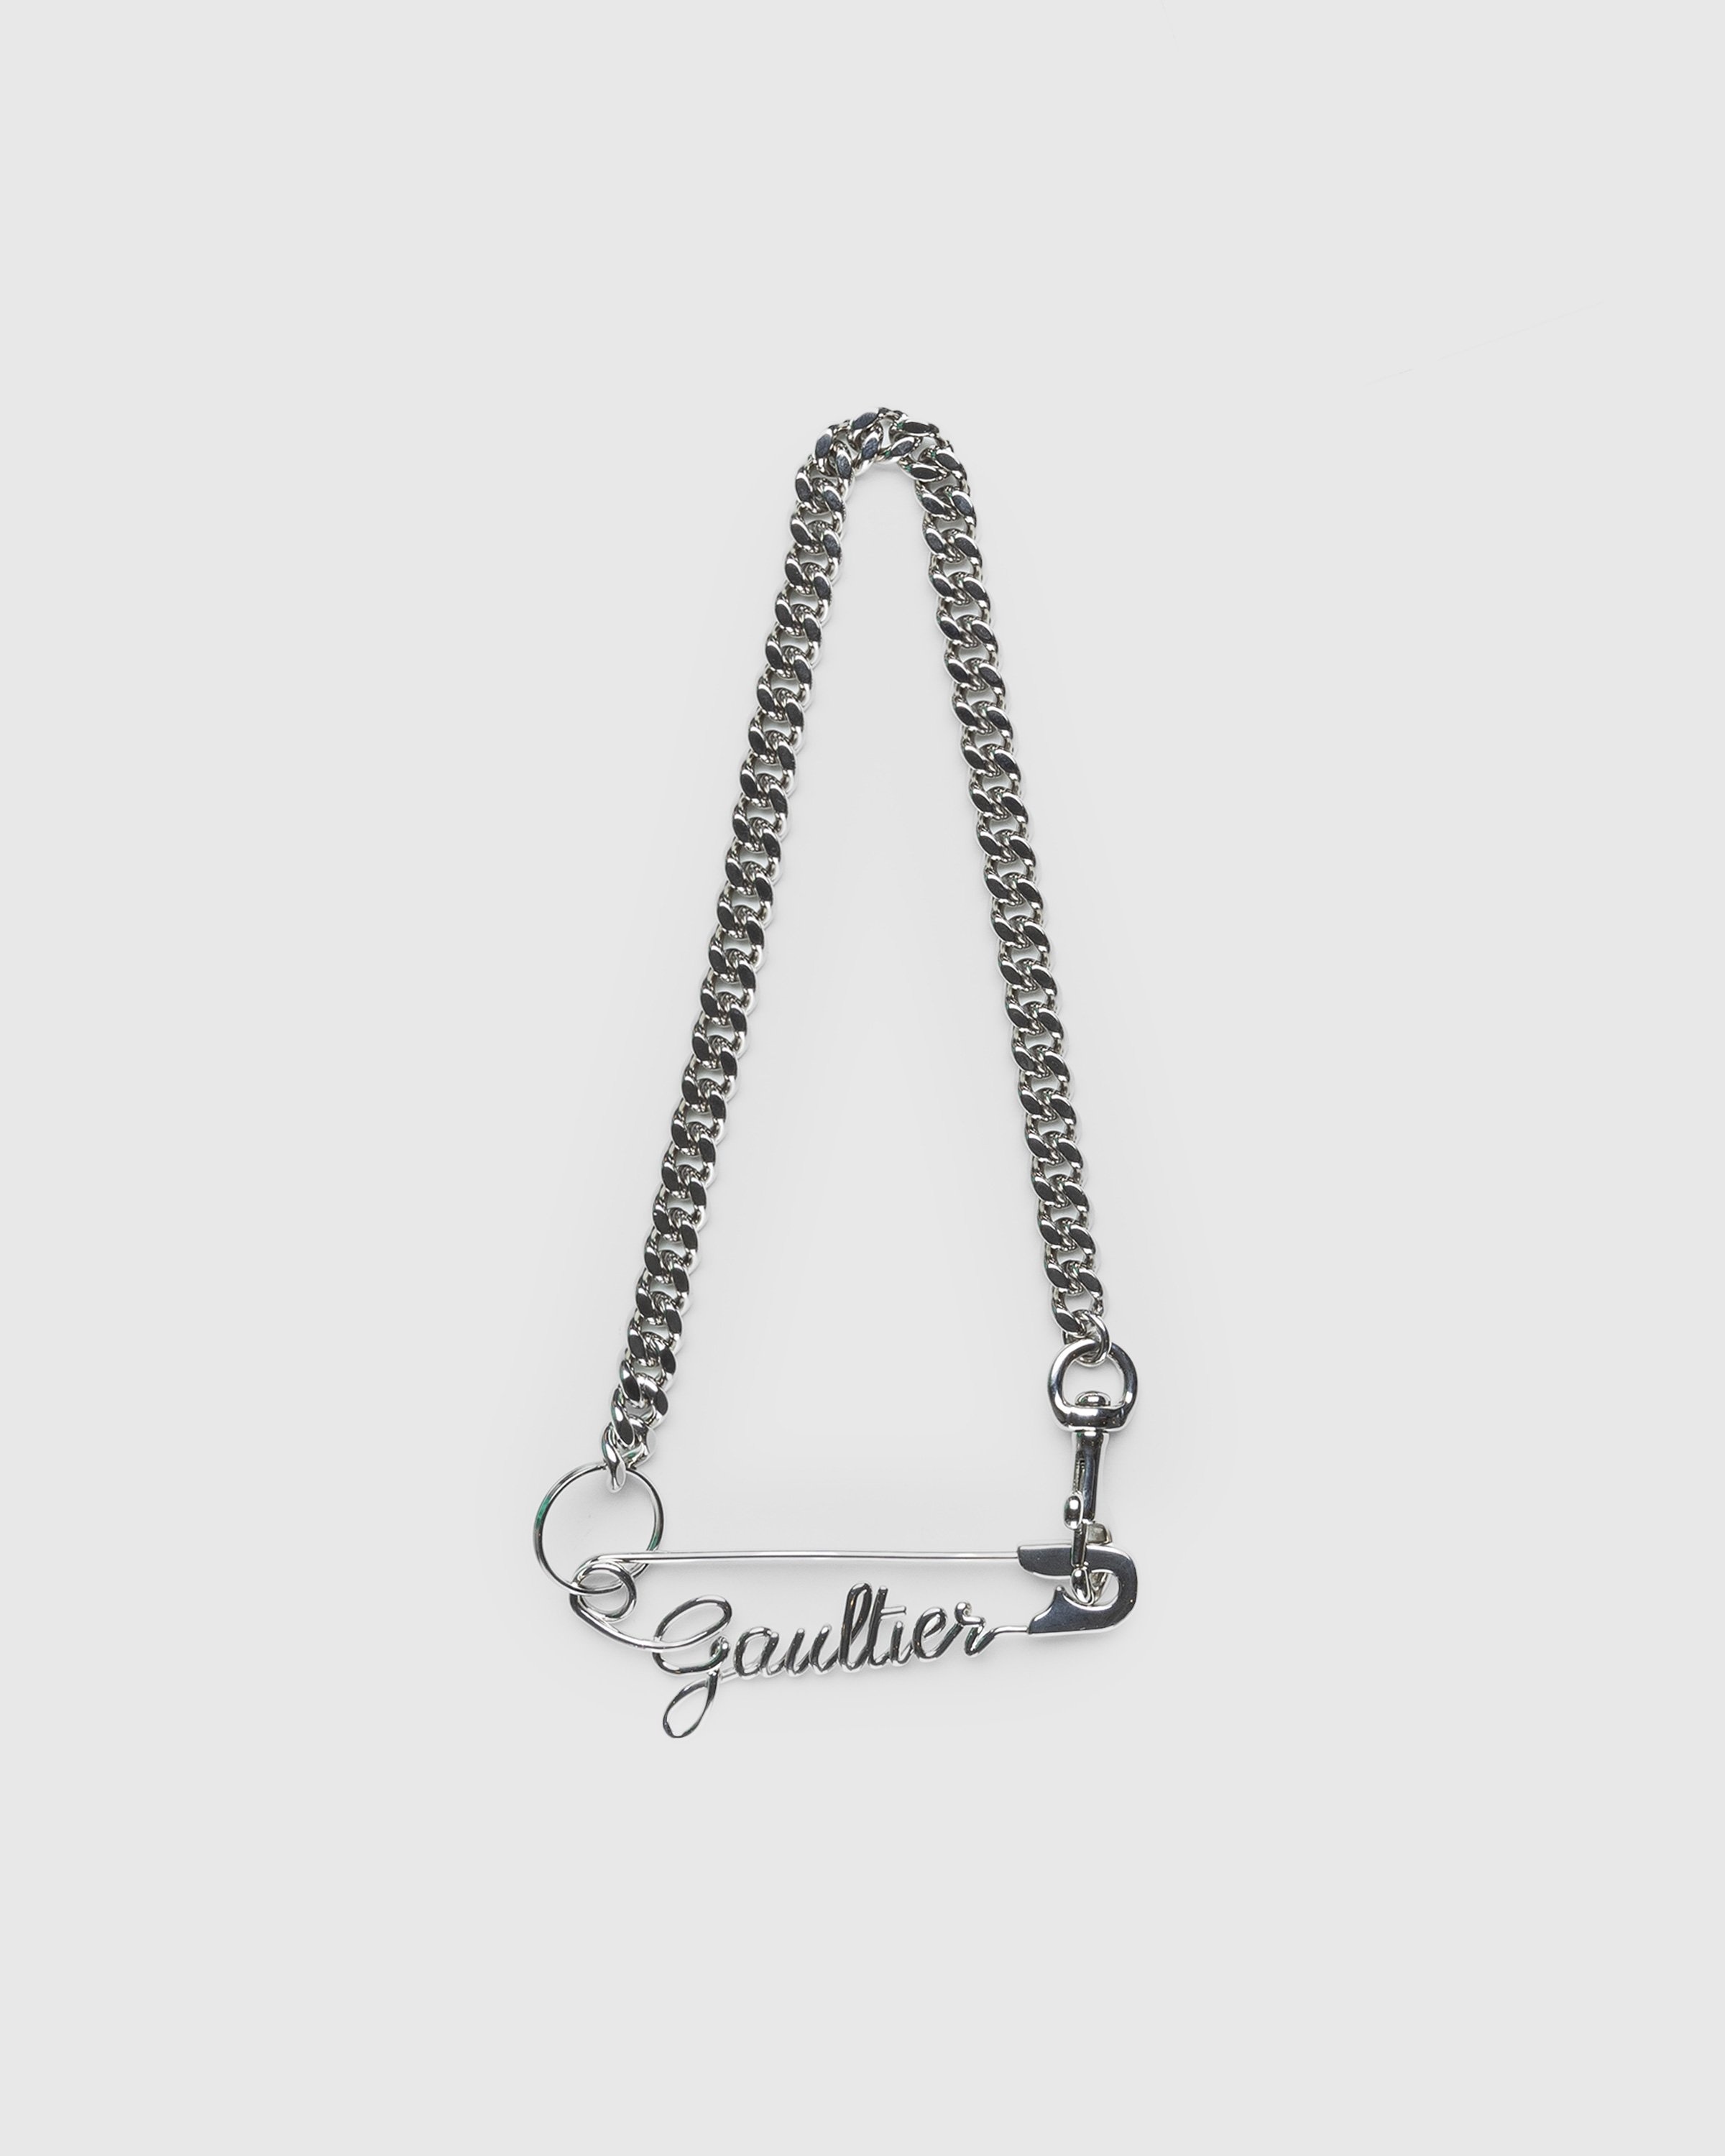 Jean Paul Gaultier – Safety Pin Gaultier Necklace Silver - Jewelry - Silver - Image 1